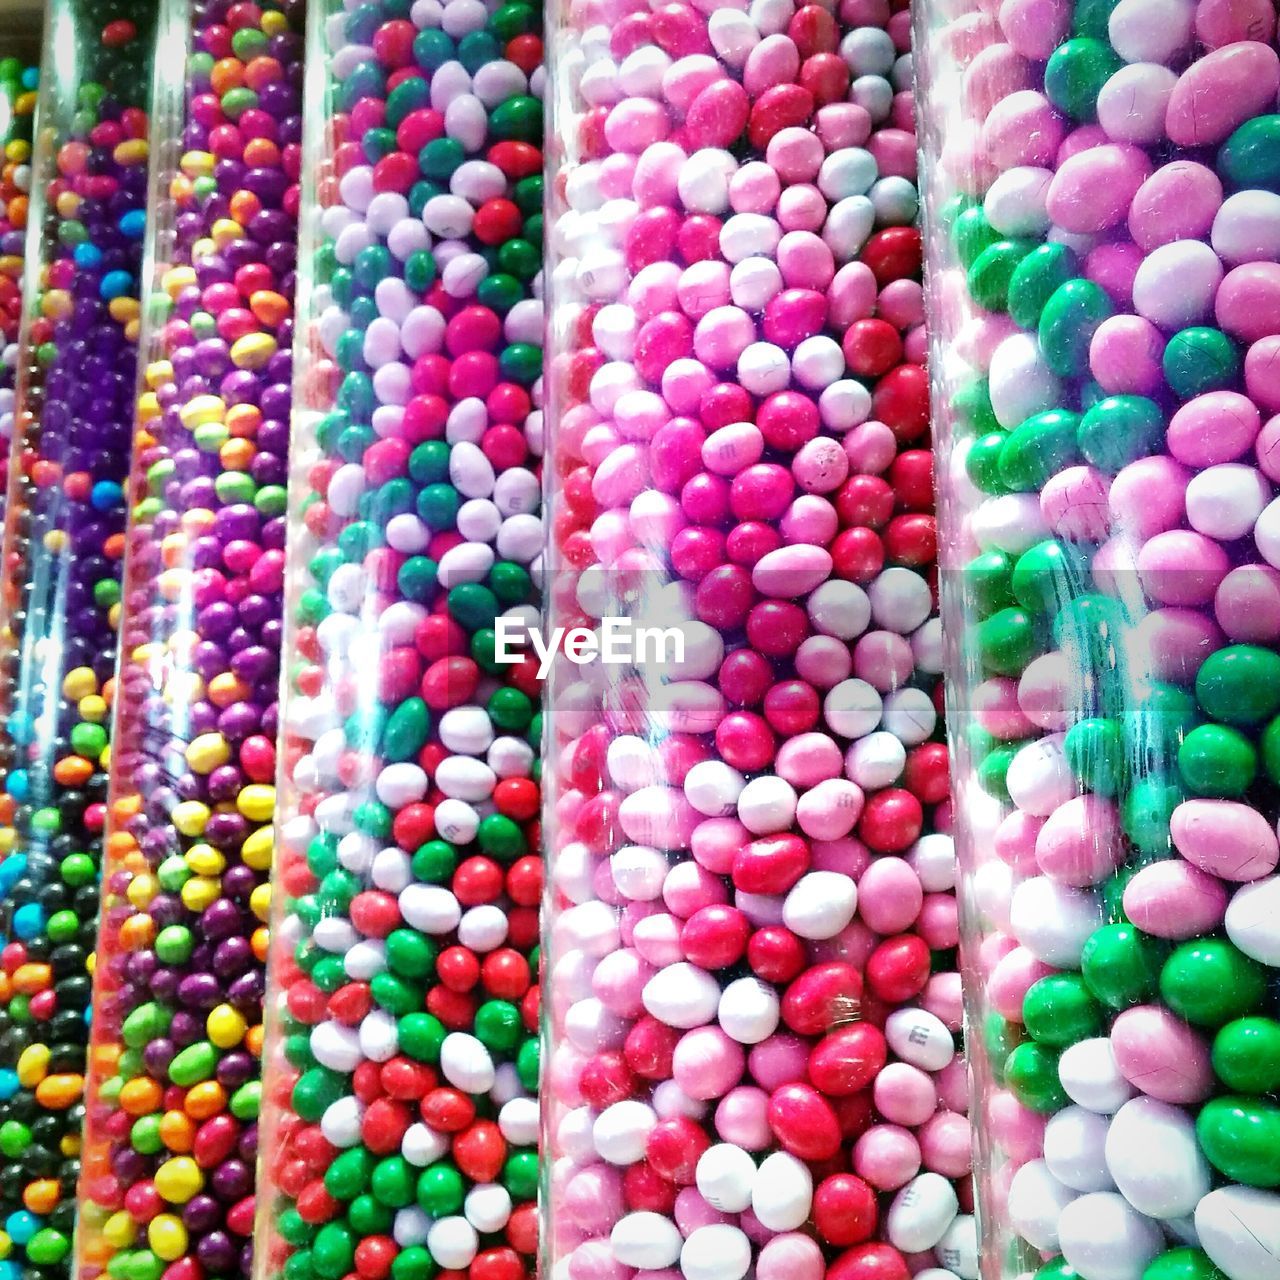 FULL FRAME SHOT OF MULTI COLORED CANDIES FOR SALE